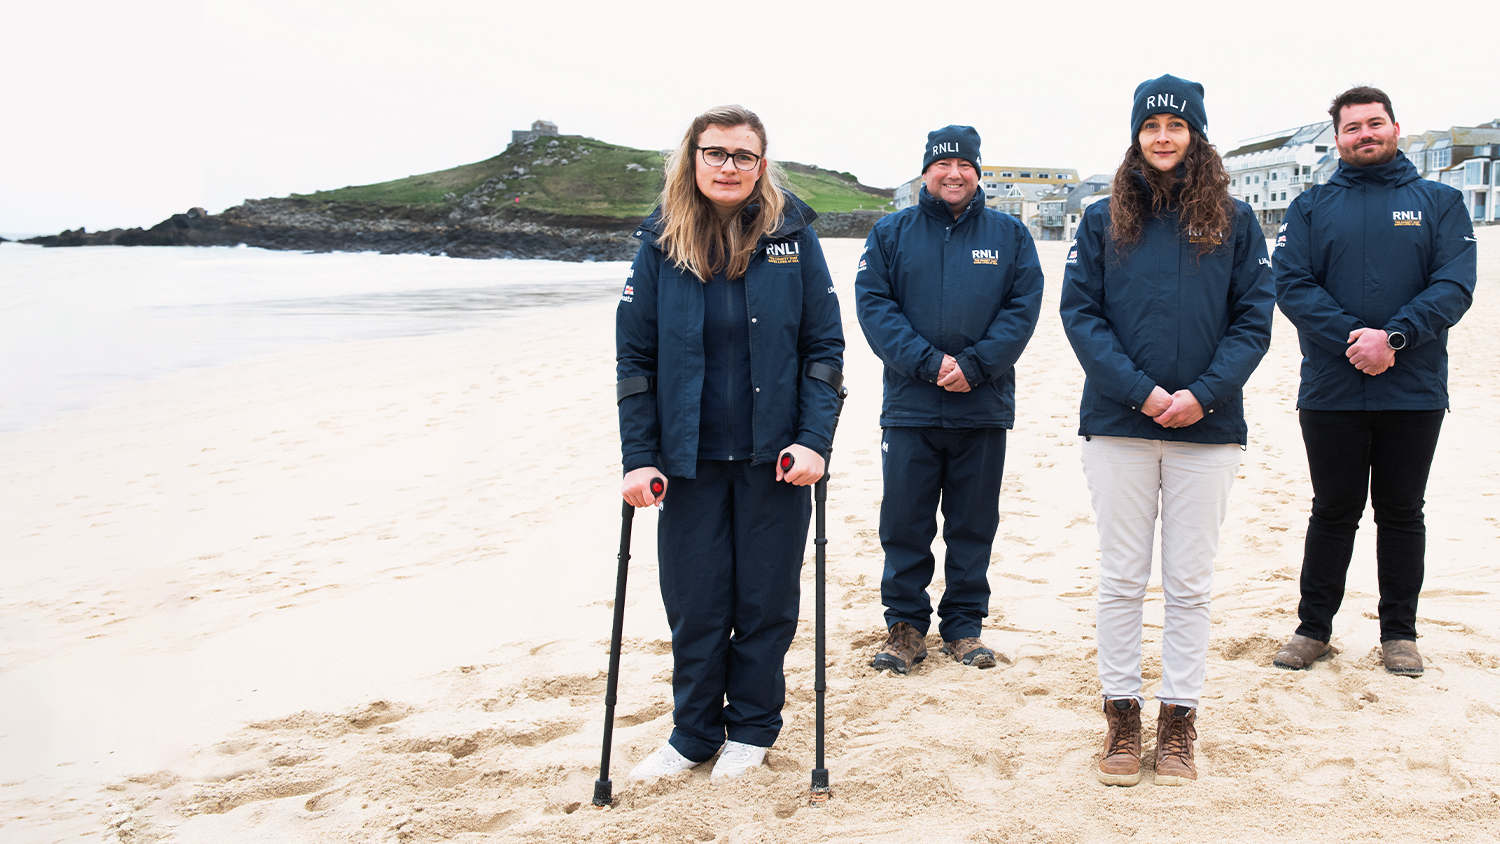 Four RNLI face-to-face fundraisers smiling in smart blue RNLI jackets with Porthmeor Beach, St Ives, in the background